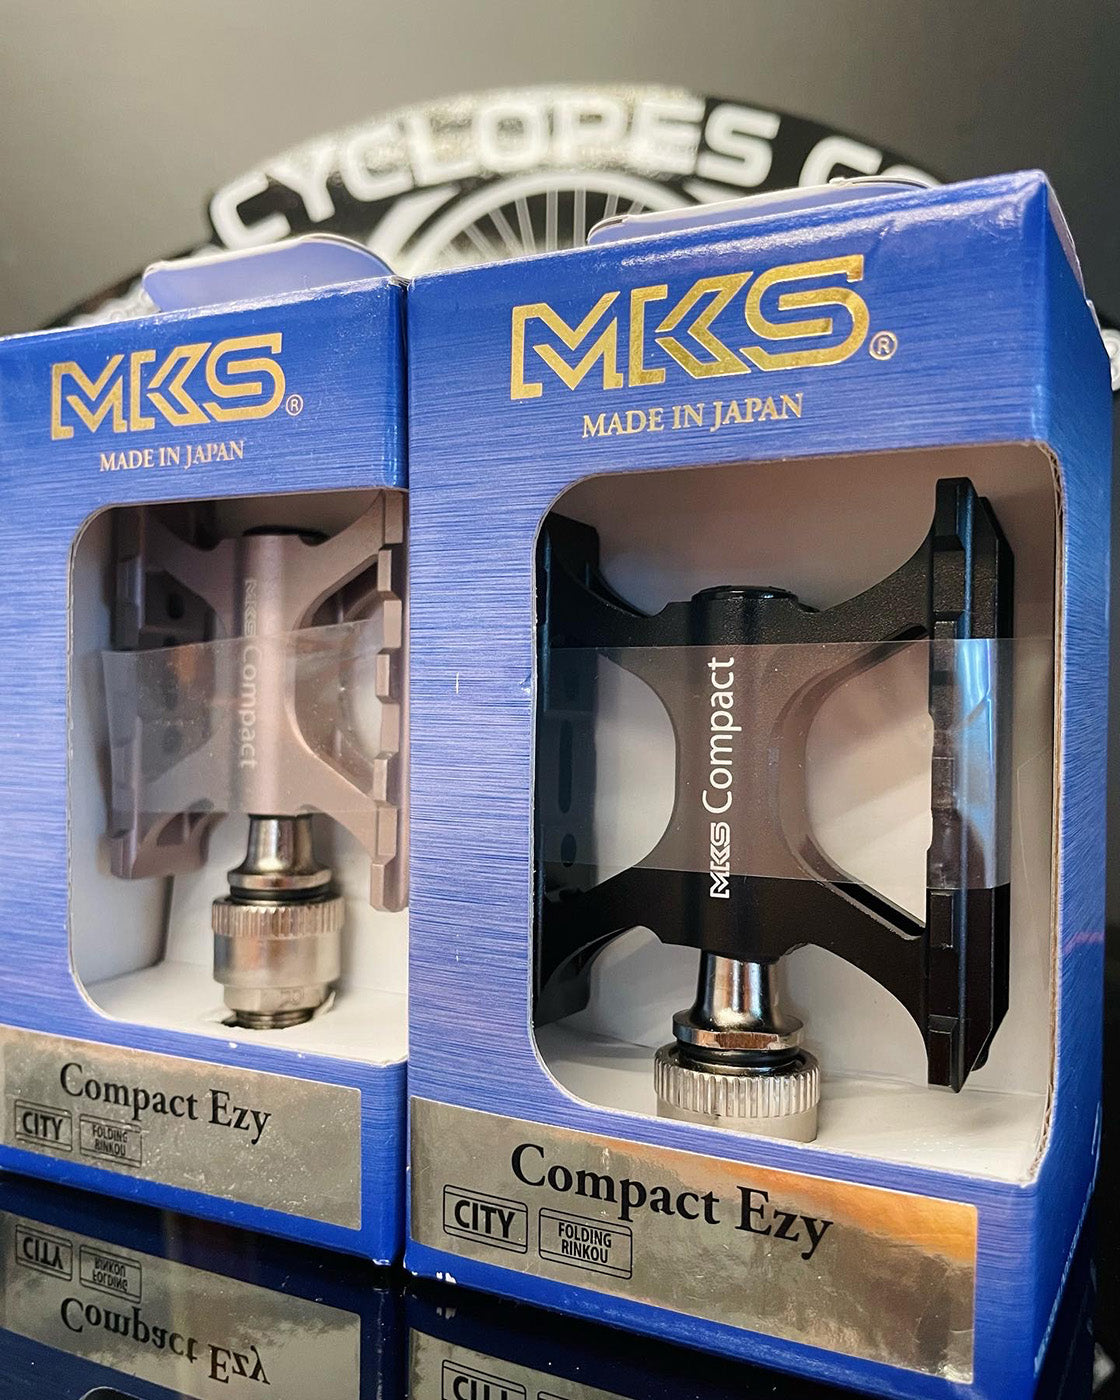 MKS Compact Ezy Pedal